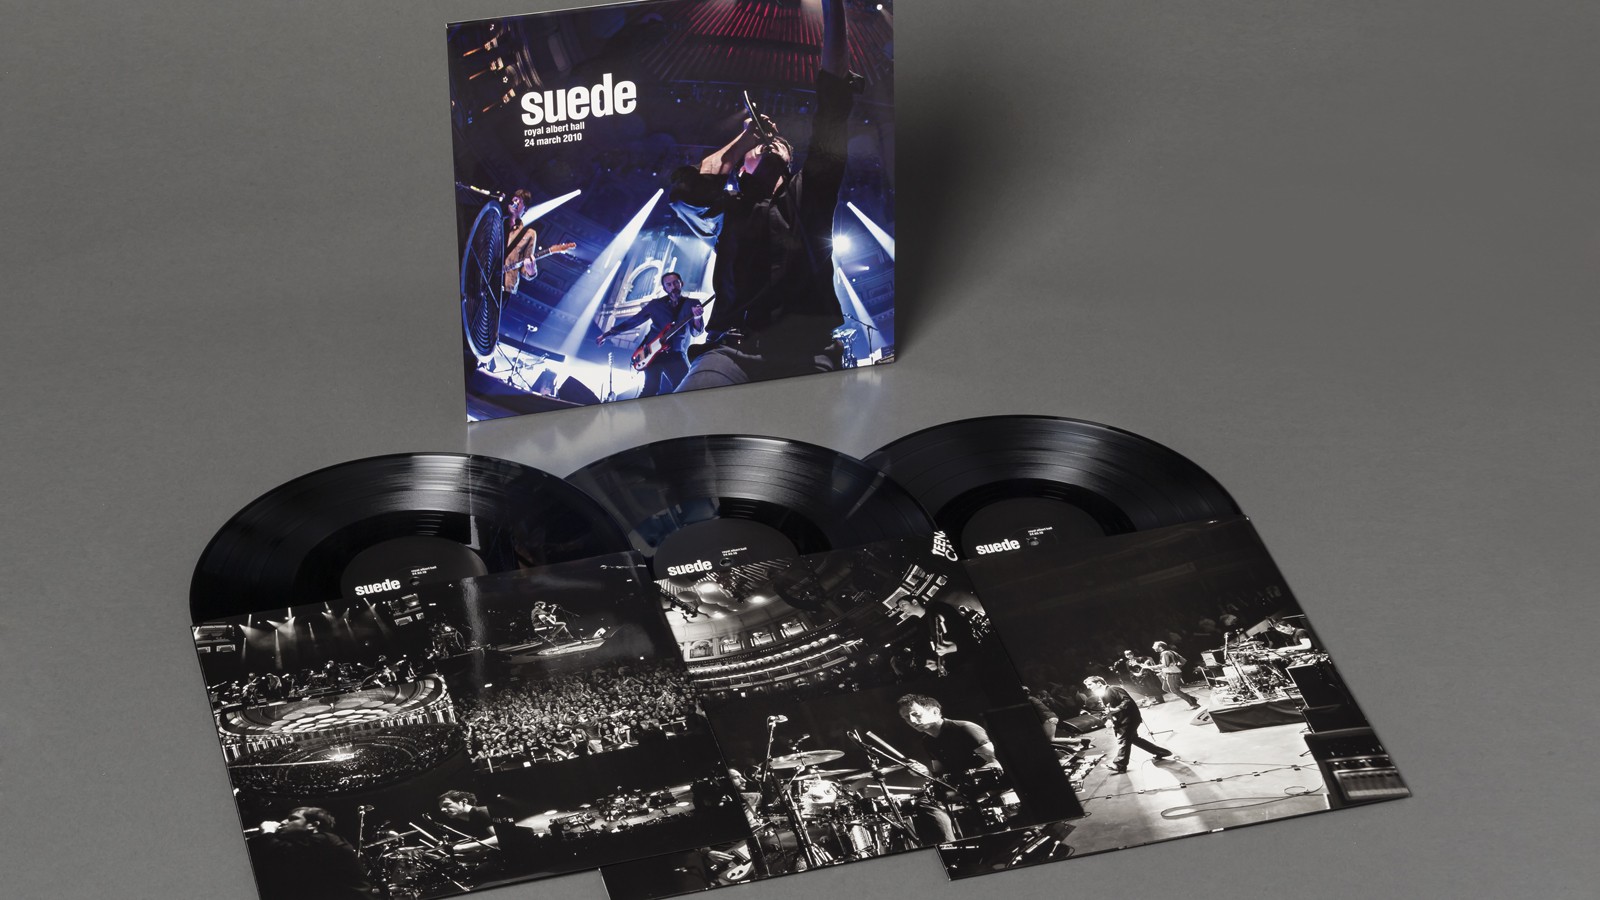 Suede - Limited Collectors Edition CD and Vinyl Box Sets